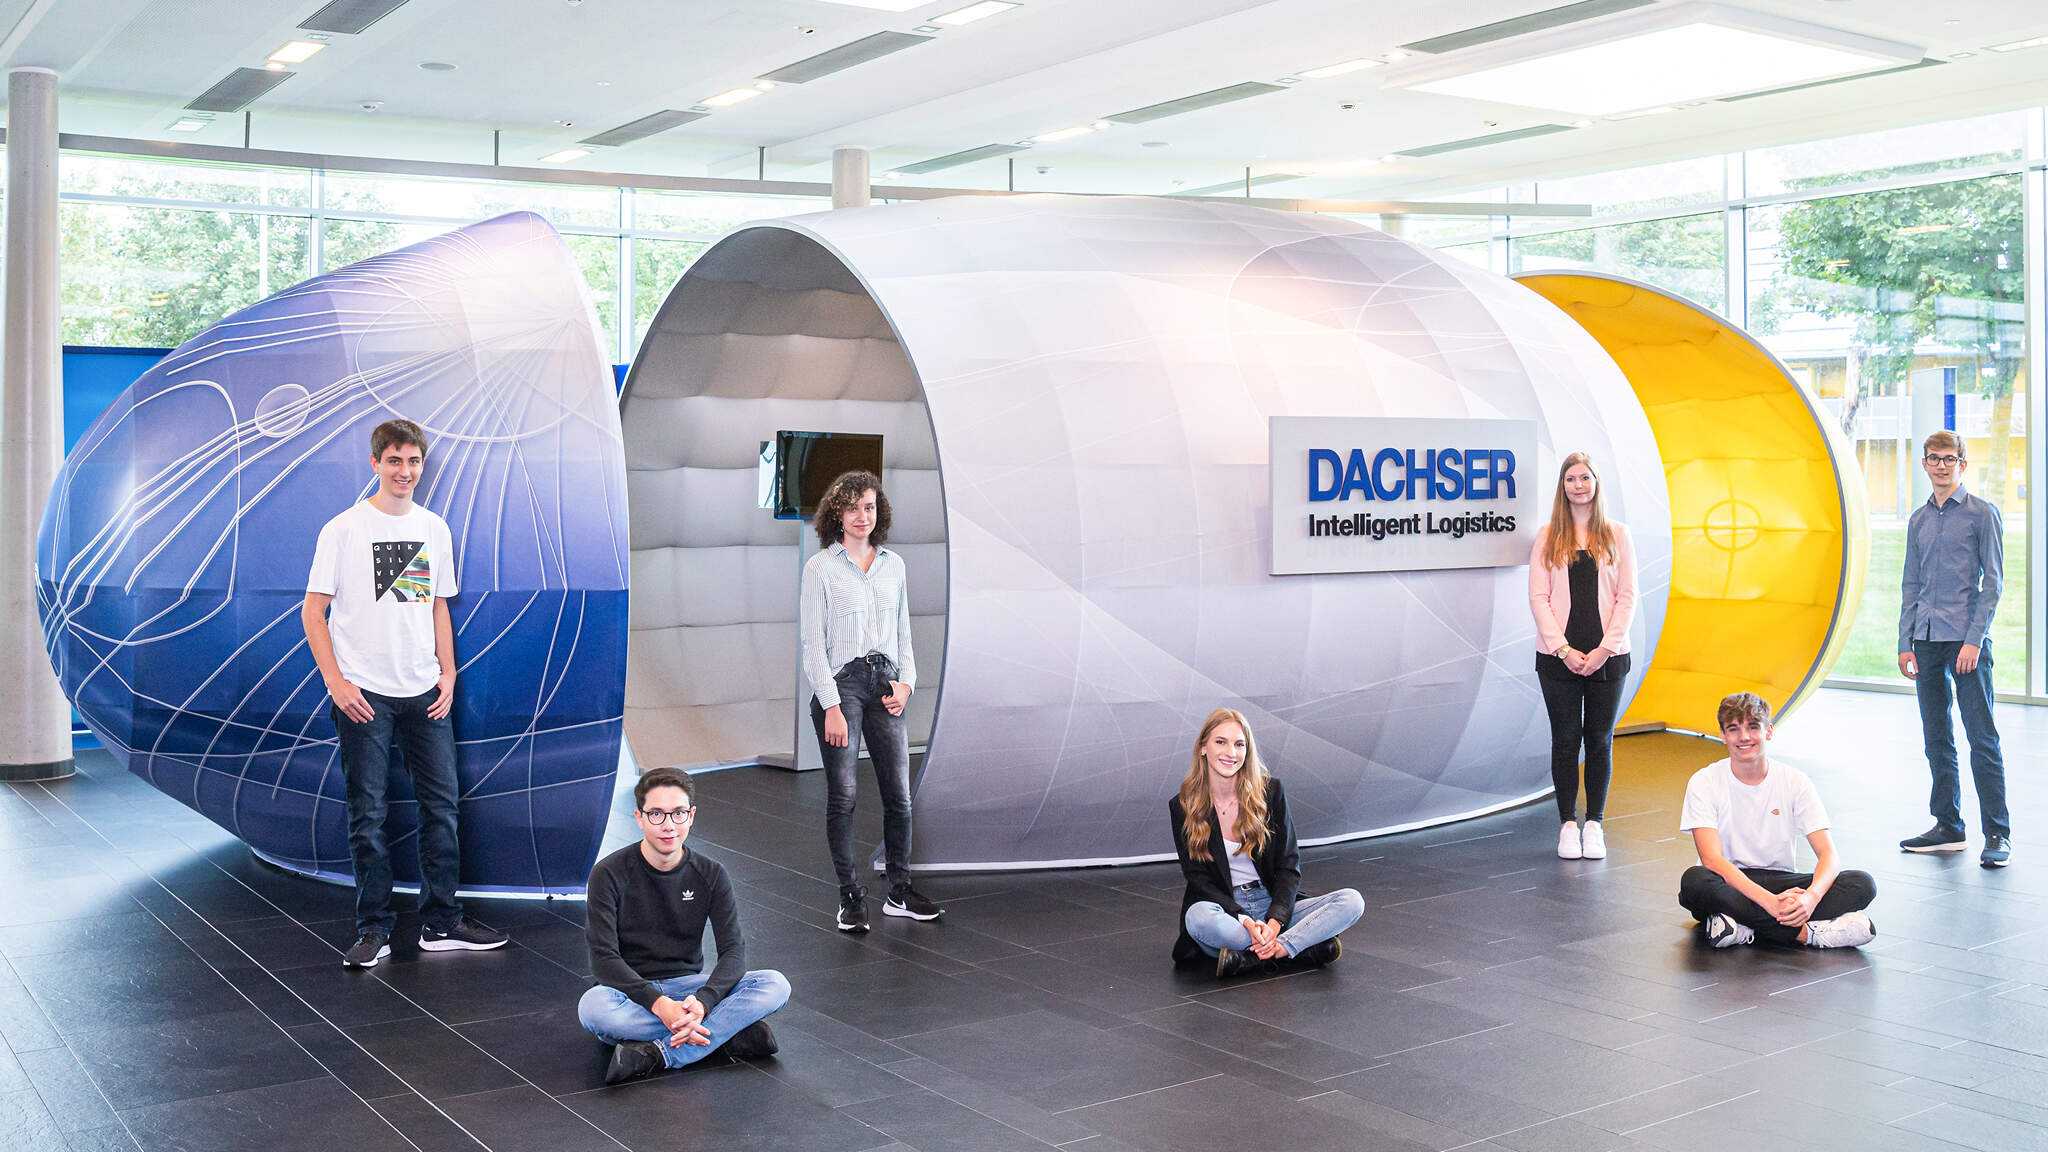 The new training year at DACHSER in Kempten